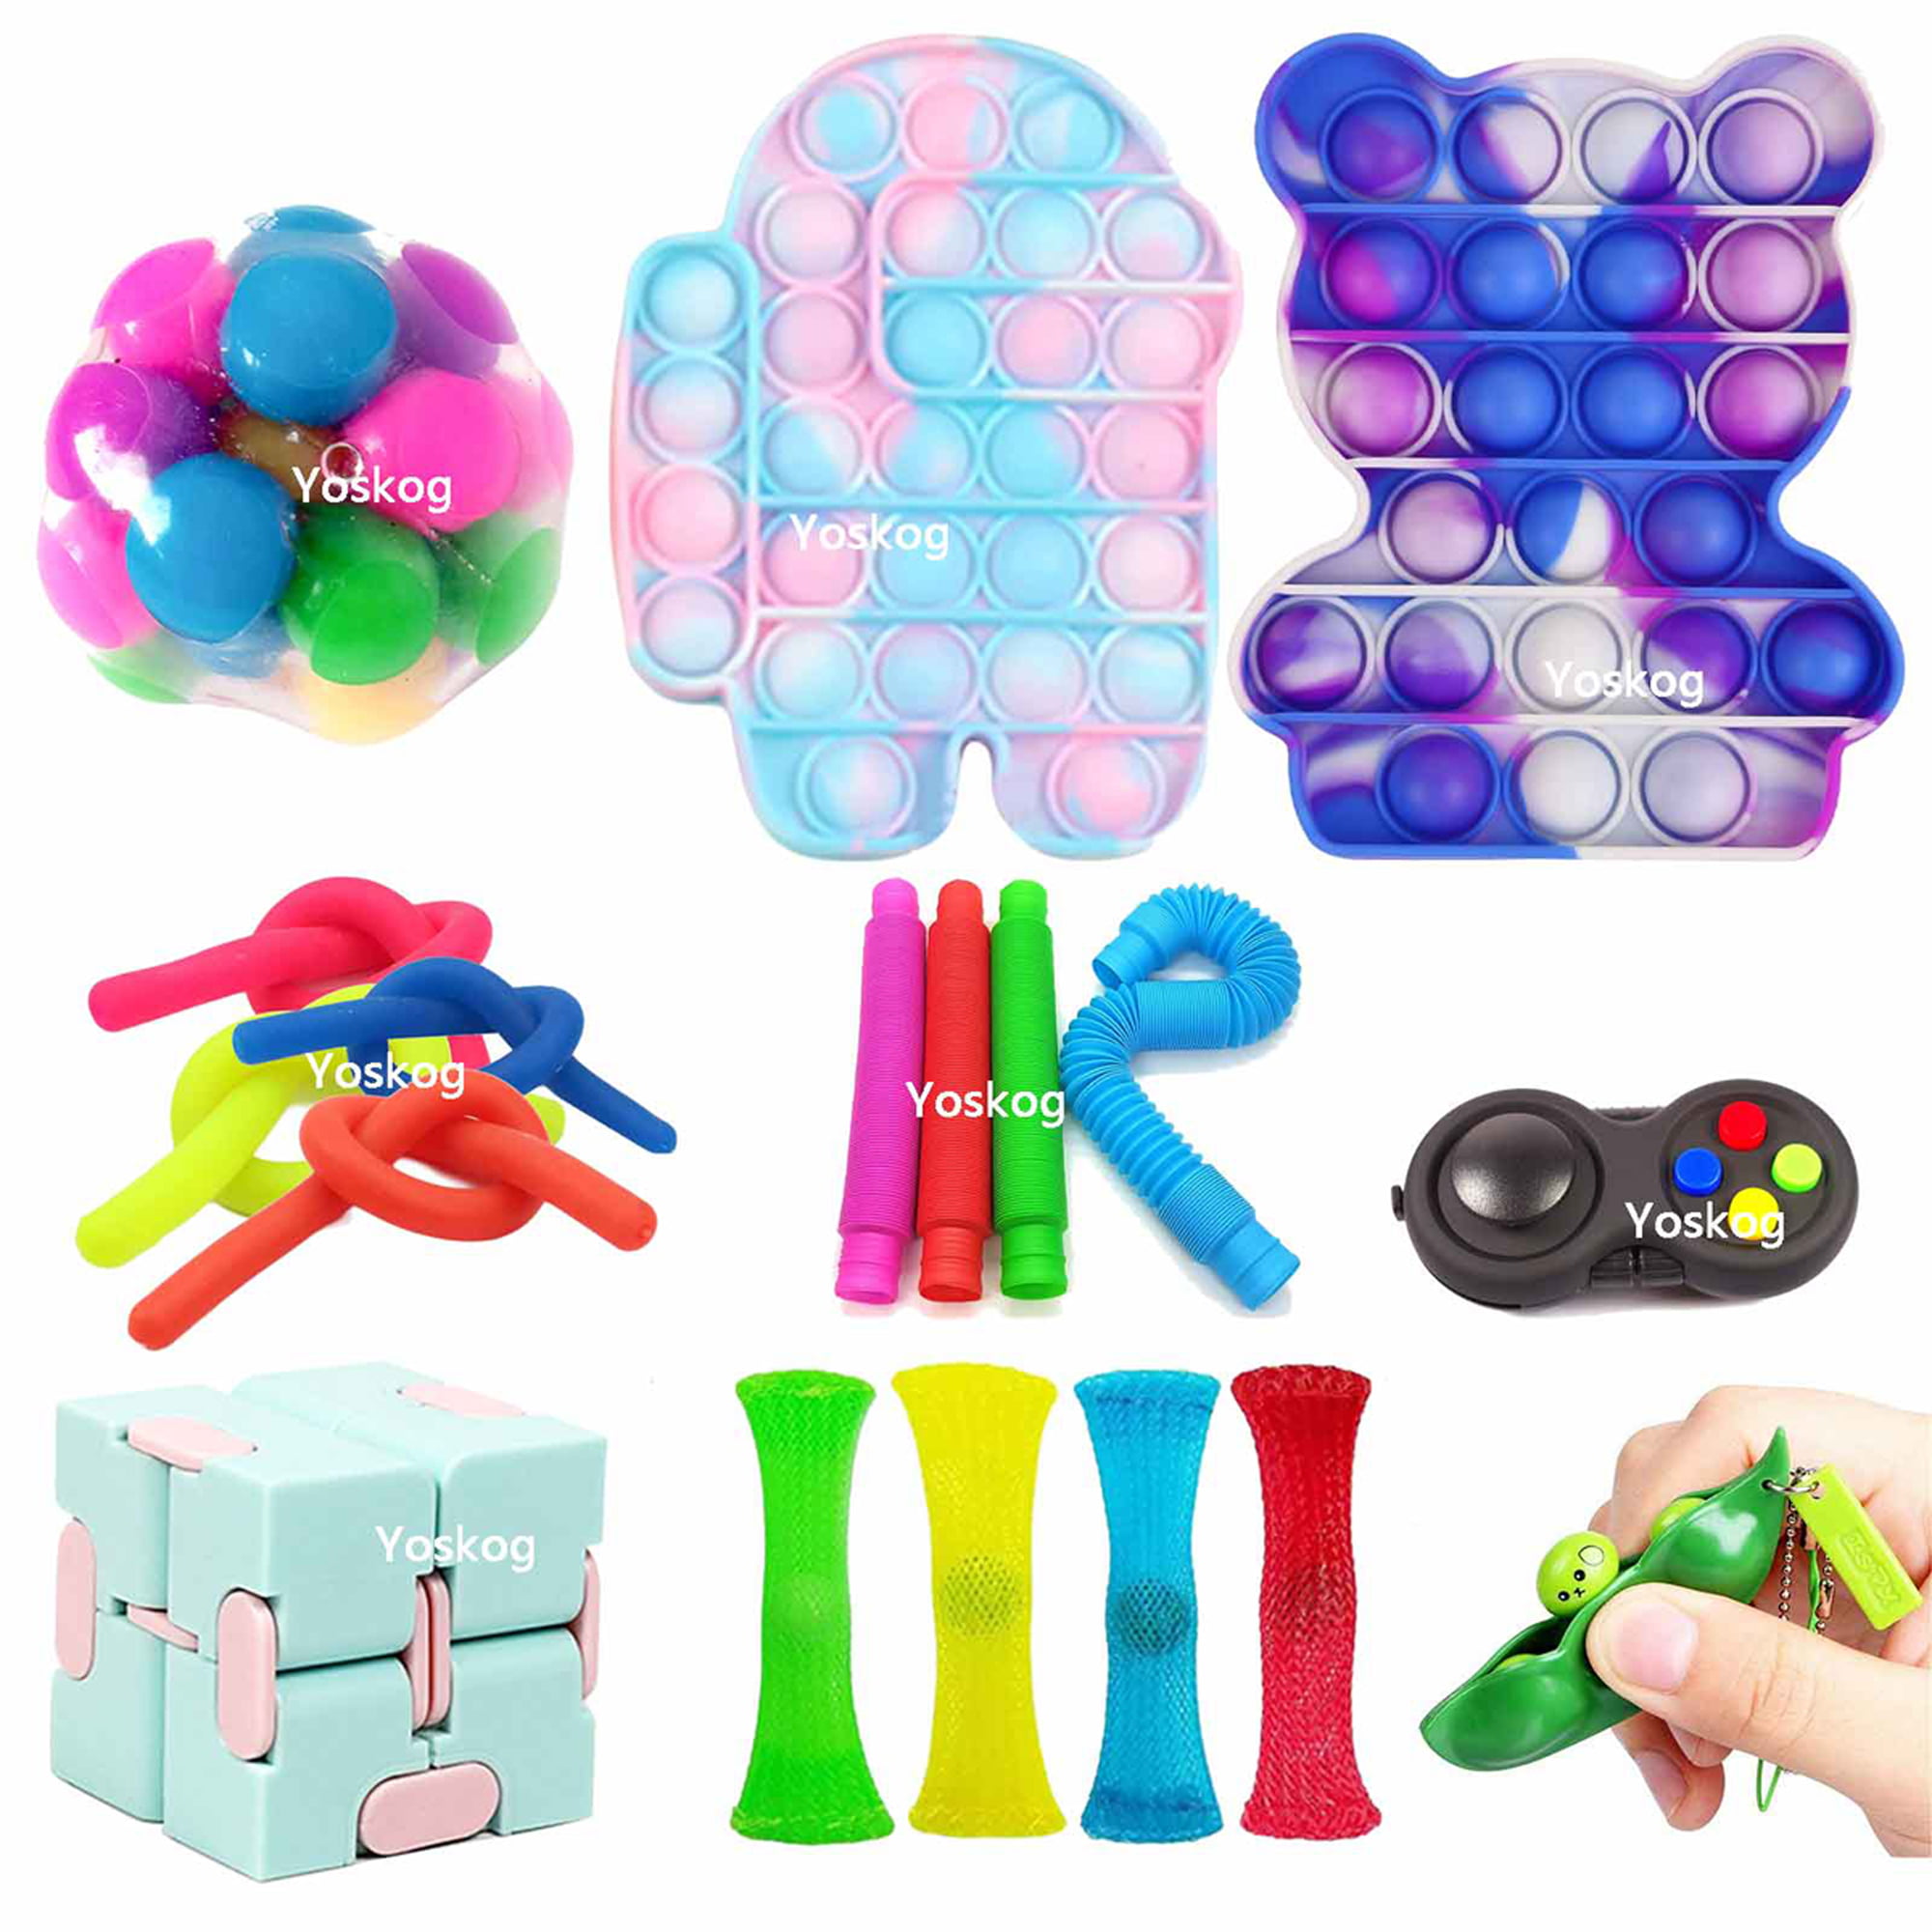 Among US Anti Stress Pop It Fidget Toy Silicone Squeeze Sensory Kids Toy for Autism Push Pop Bubble Sensory Fidget Toy 2 Pack Style 2 Anxiety/Stress Relievers for Office